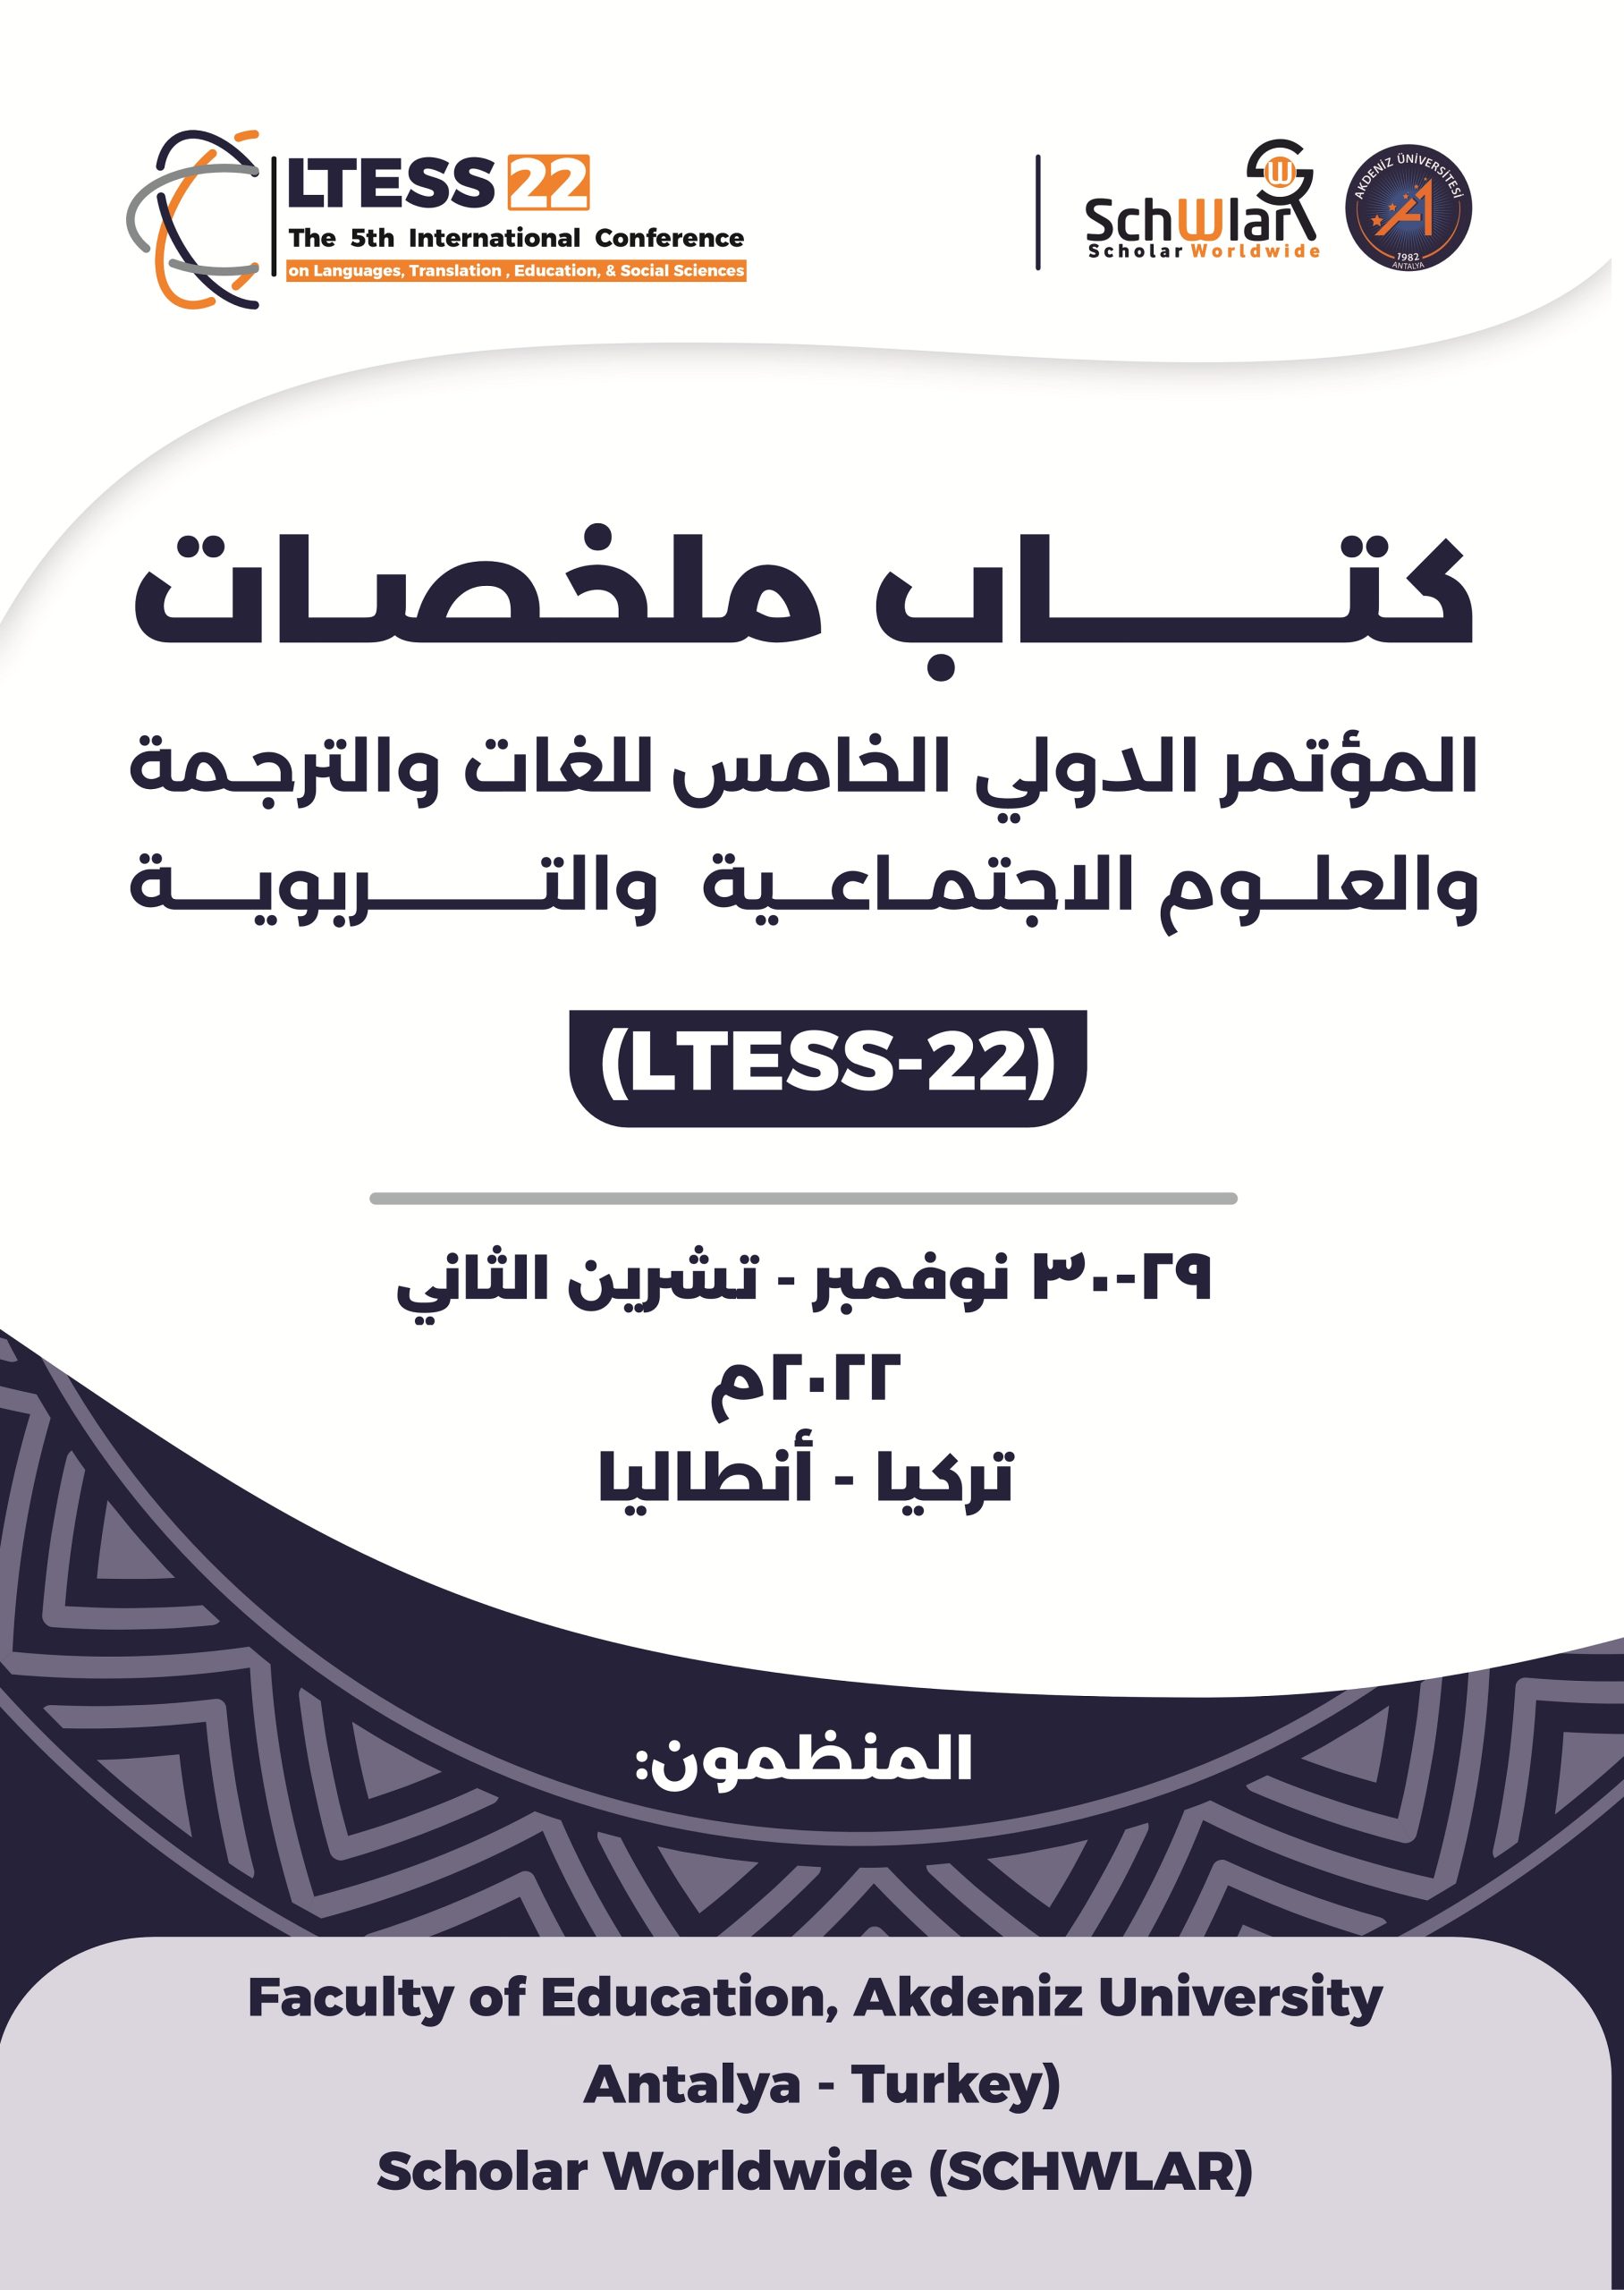 Abstract book for The 5th International Conference on Languages, Translation & Social Sciences (LTESS-22)